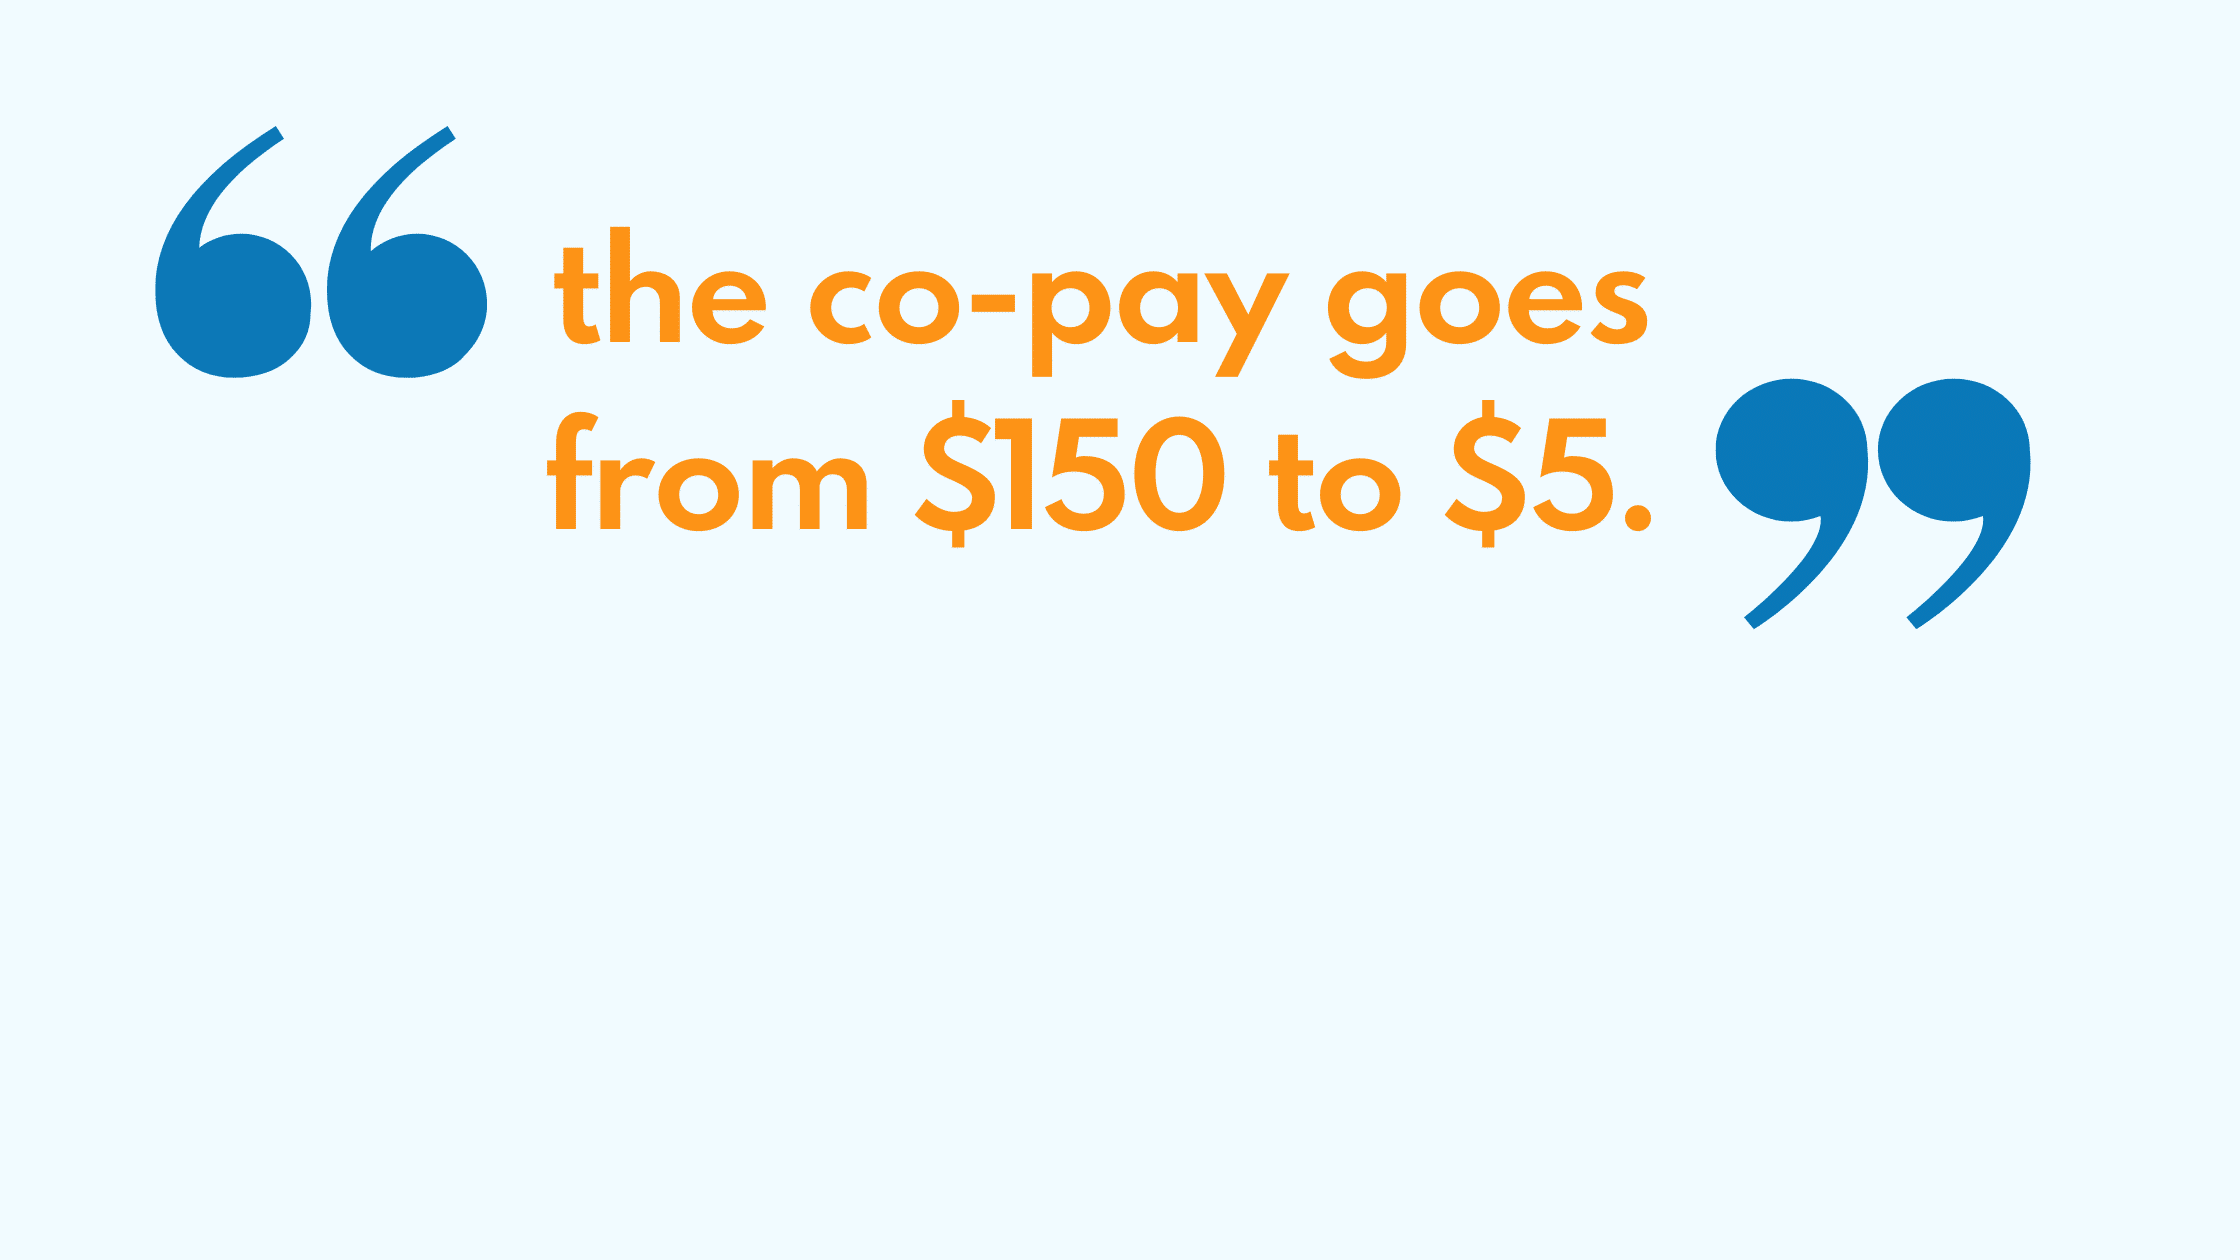 “And there you go,” Patel says, “the co-pay goes from $150 to $5.”